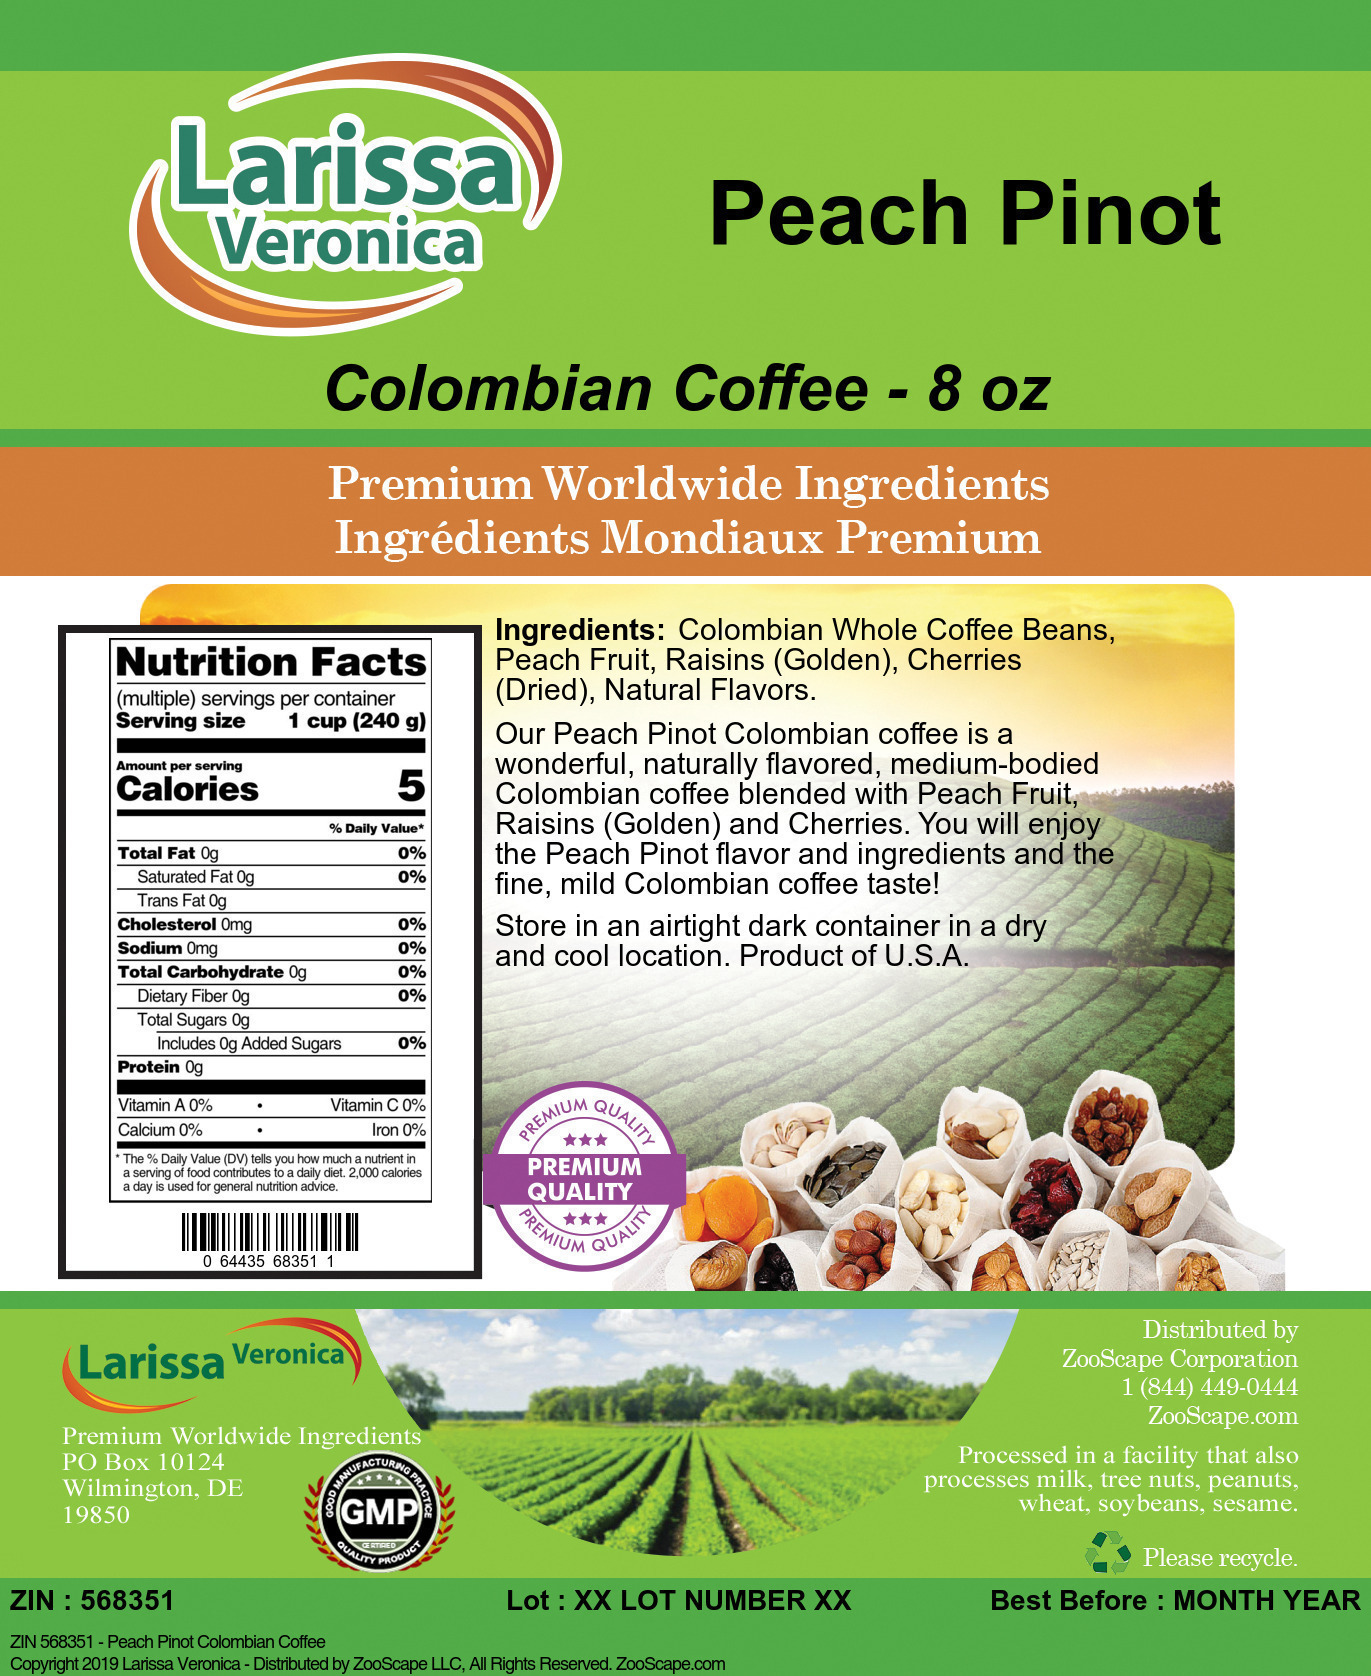 Peach Pinot Colombian Coffee - Label